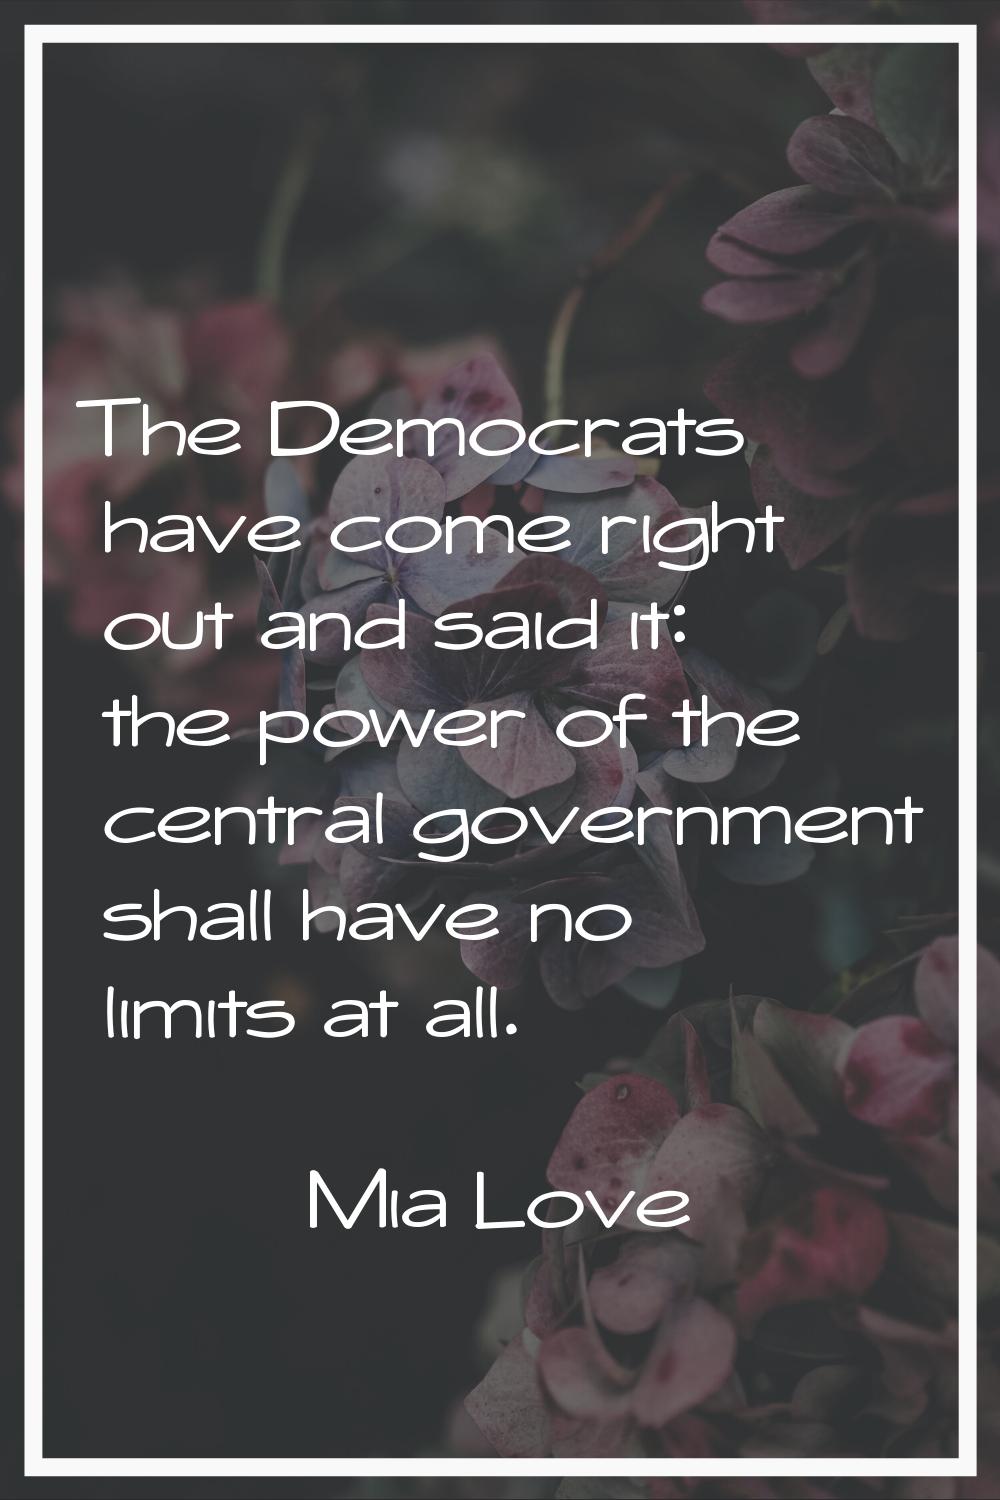 The Democrats have come right out and said it: the power of the central government shall have no li